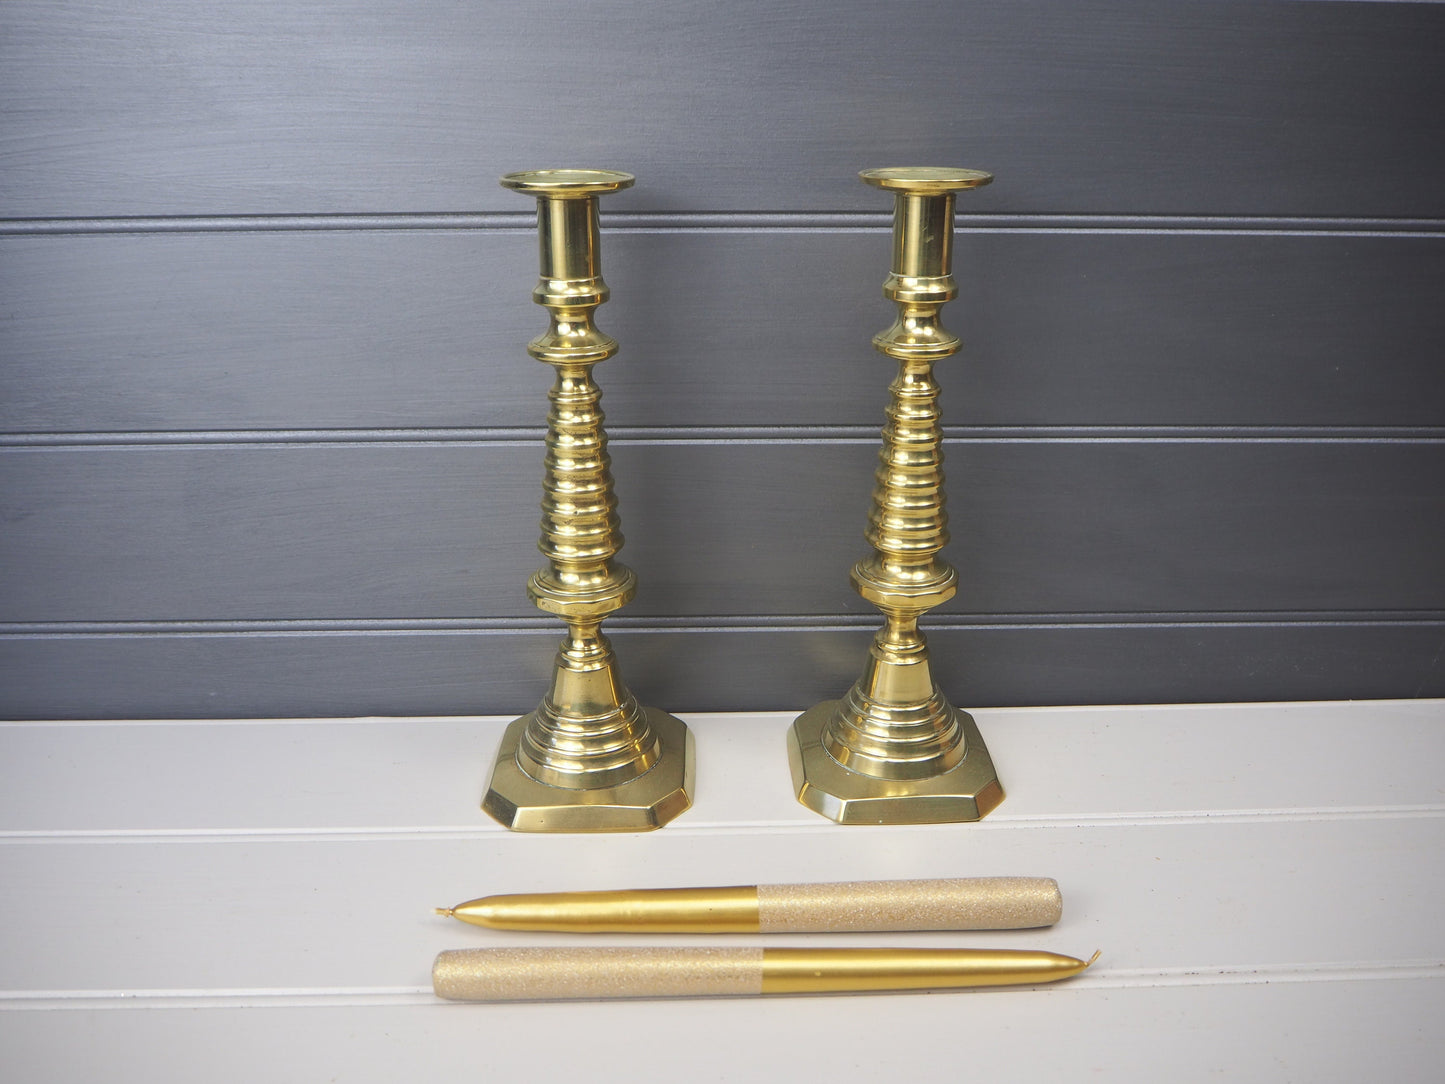 PAIR Vintage French polished brass decorative candlesticks with bobbin detail Candle holders Mantle Decor Table decor Tablescape accessories